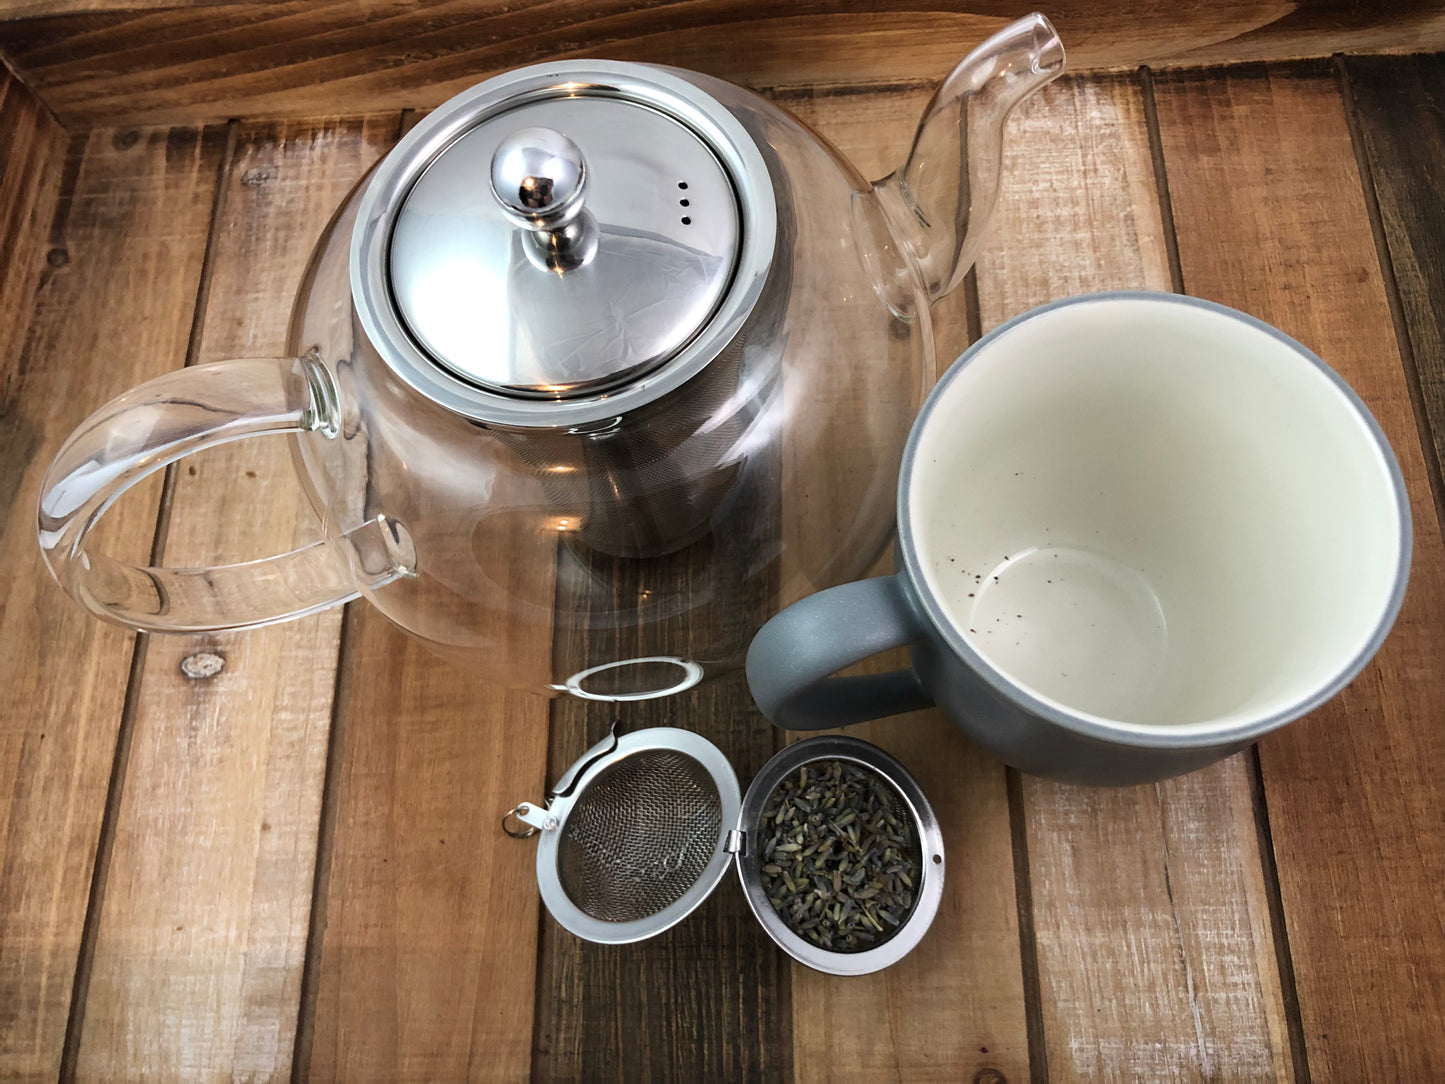 Ariel view of clear teapot, mesh tea infuser filled with dried lavender, next to a grey and white coffee mug on a wooden table as background